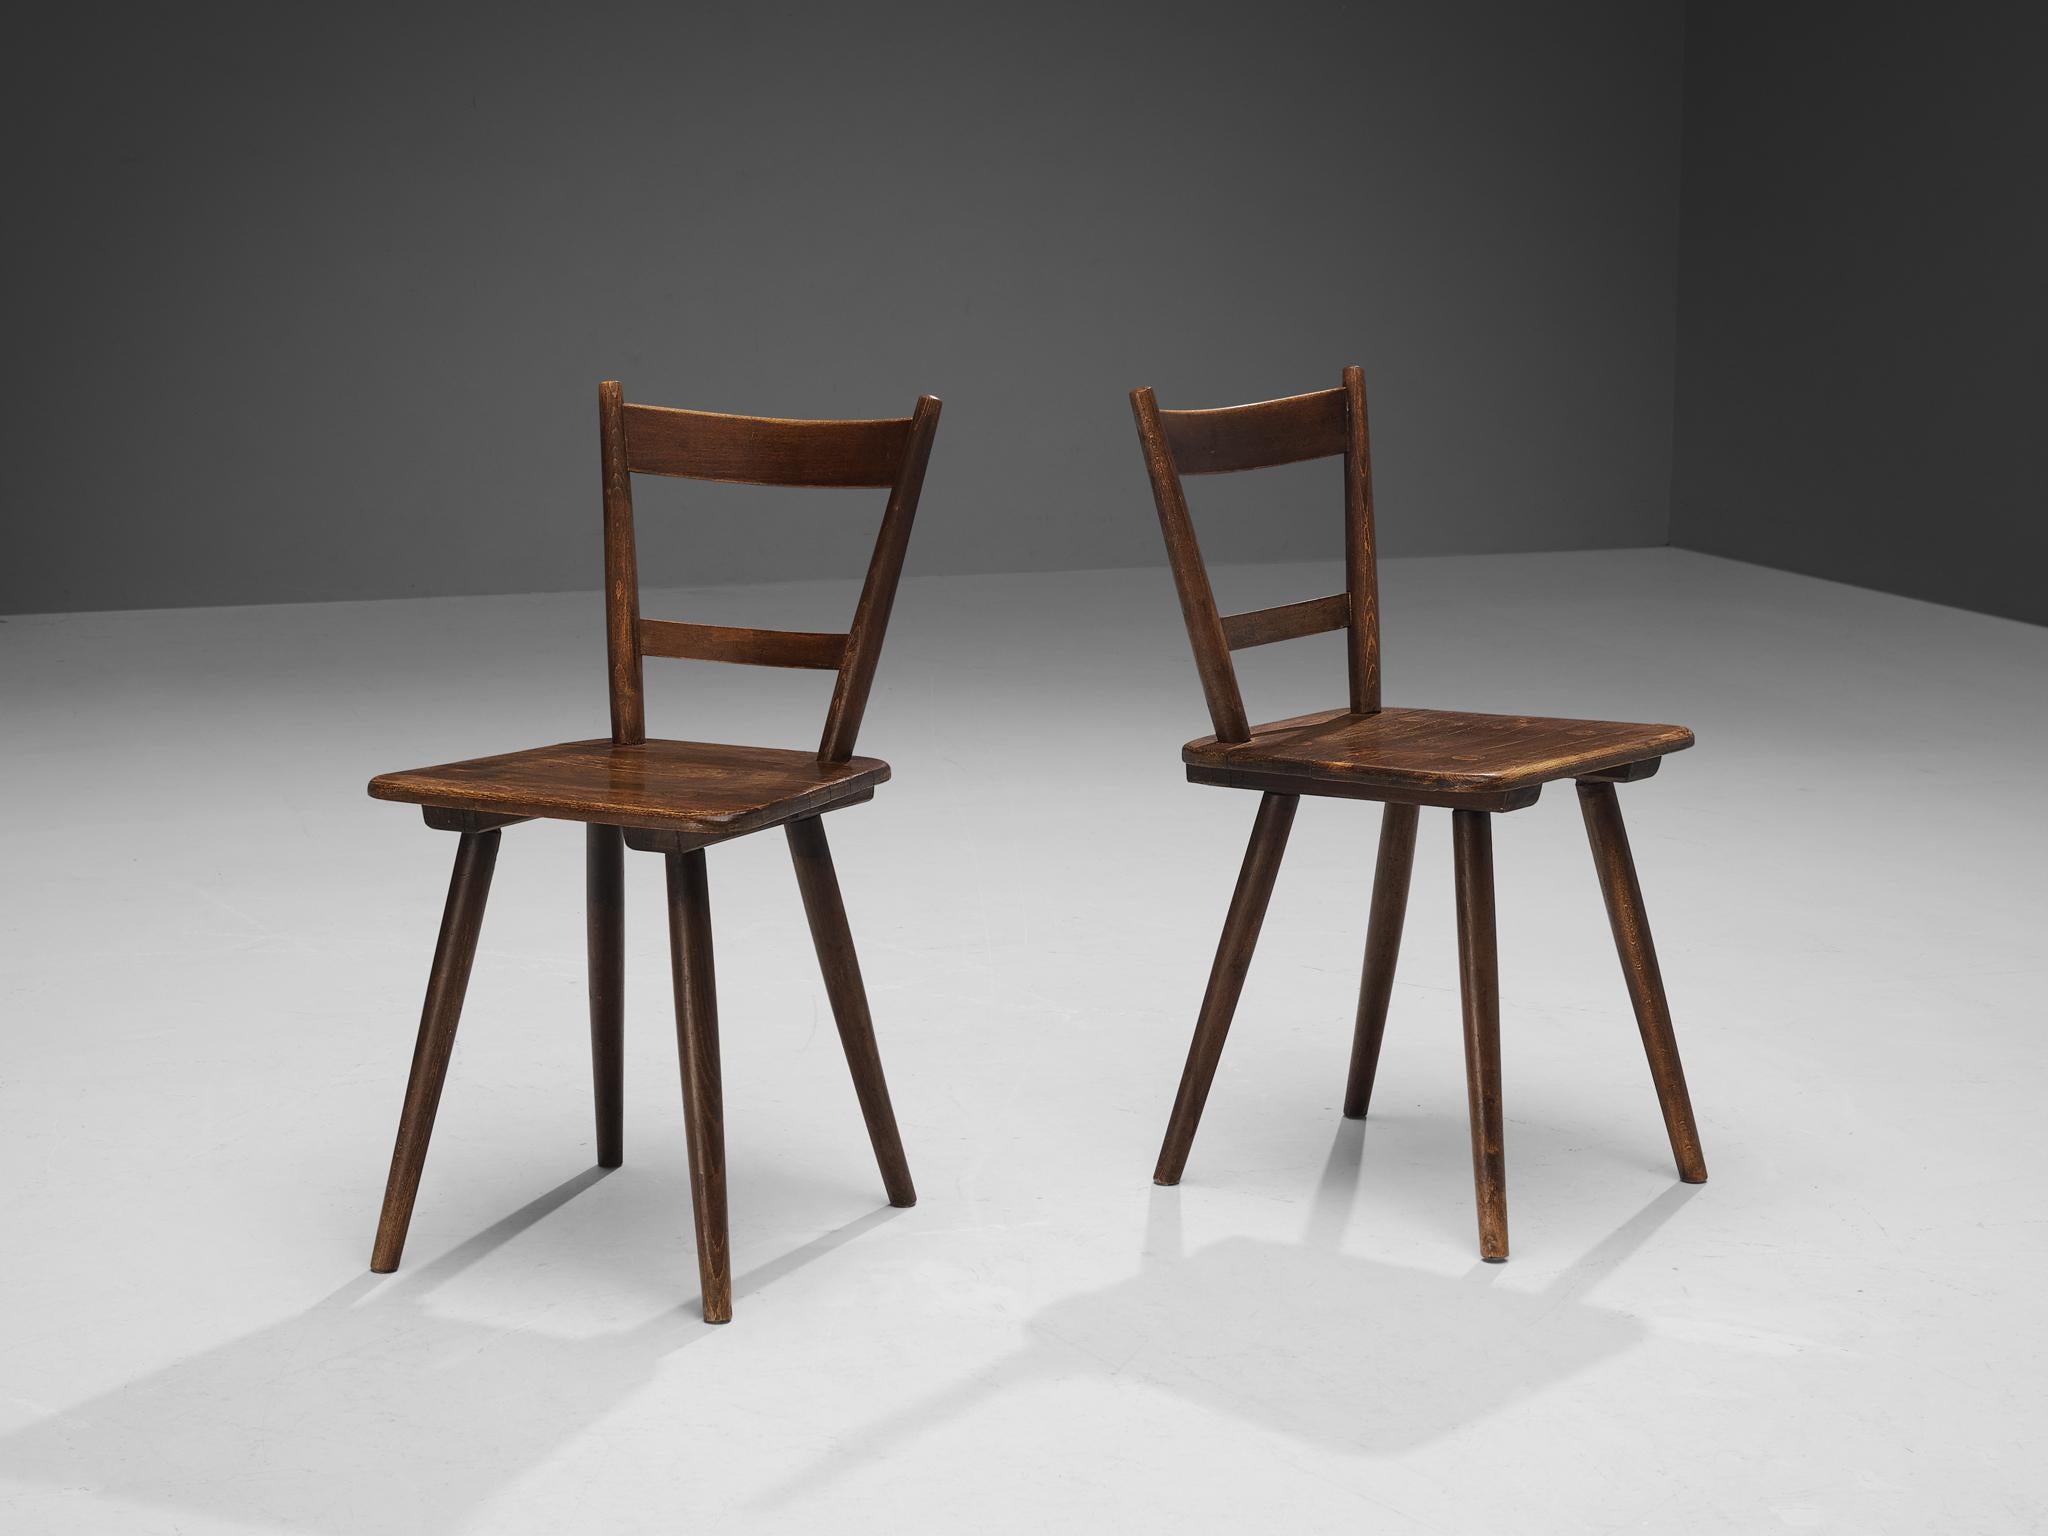 Pair of dining chairs, stained wood, France, late 1940s. 

Rustic pair of dining chairs manufactured in France. Simple yet stylish, these chairs feature a modest frame with sleek, elegant elements. Note for example the tapered legs slightly pointing